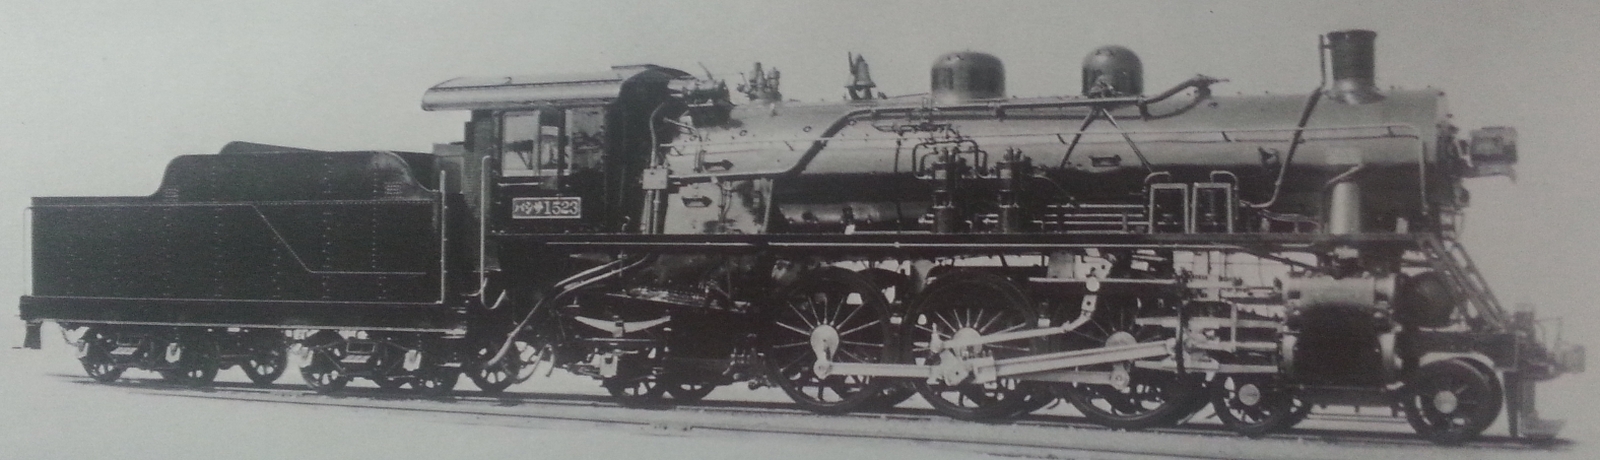 Locomotive no. 1523 from the last series in a factory photo by Kisha Seizo